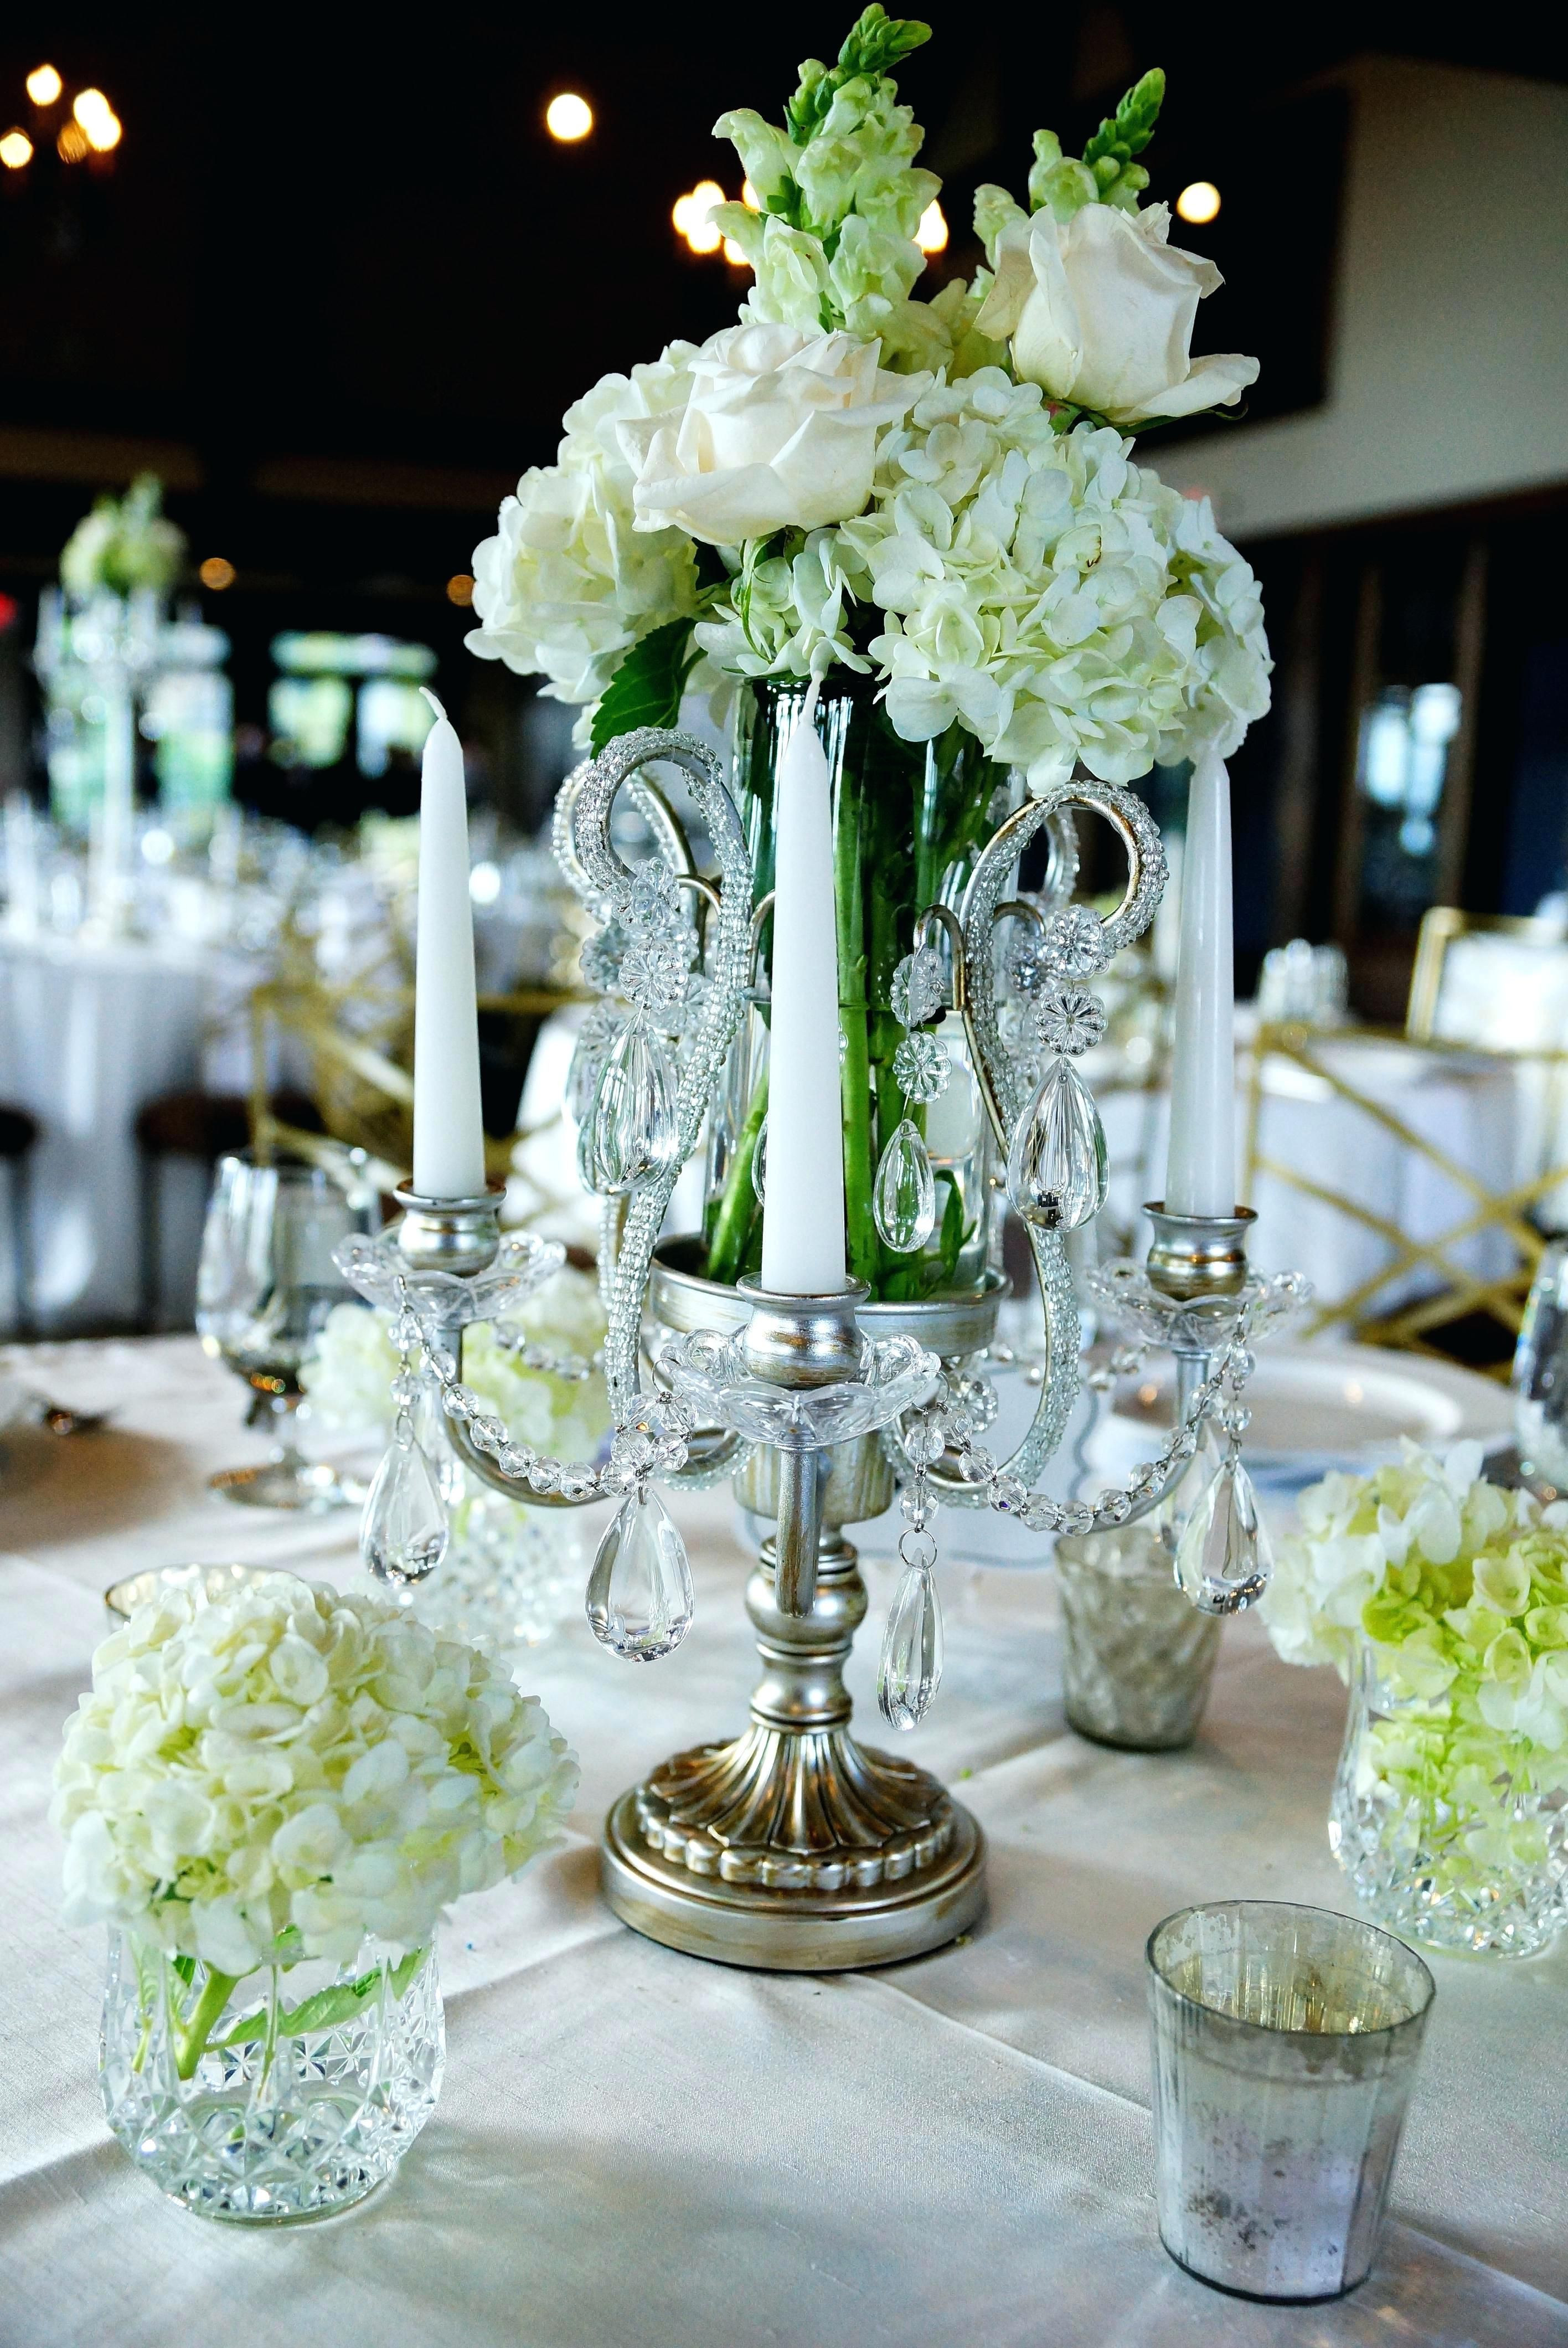 11 Ideal Used Wedding Centerpiece Vases for Sale 2022 free download used wedding centerpiece vases for sale of imagenes de wedding decorations for sale used for used wedding decorations for sale new used wedding centerpieces for sale